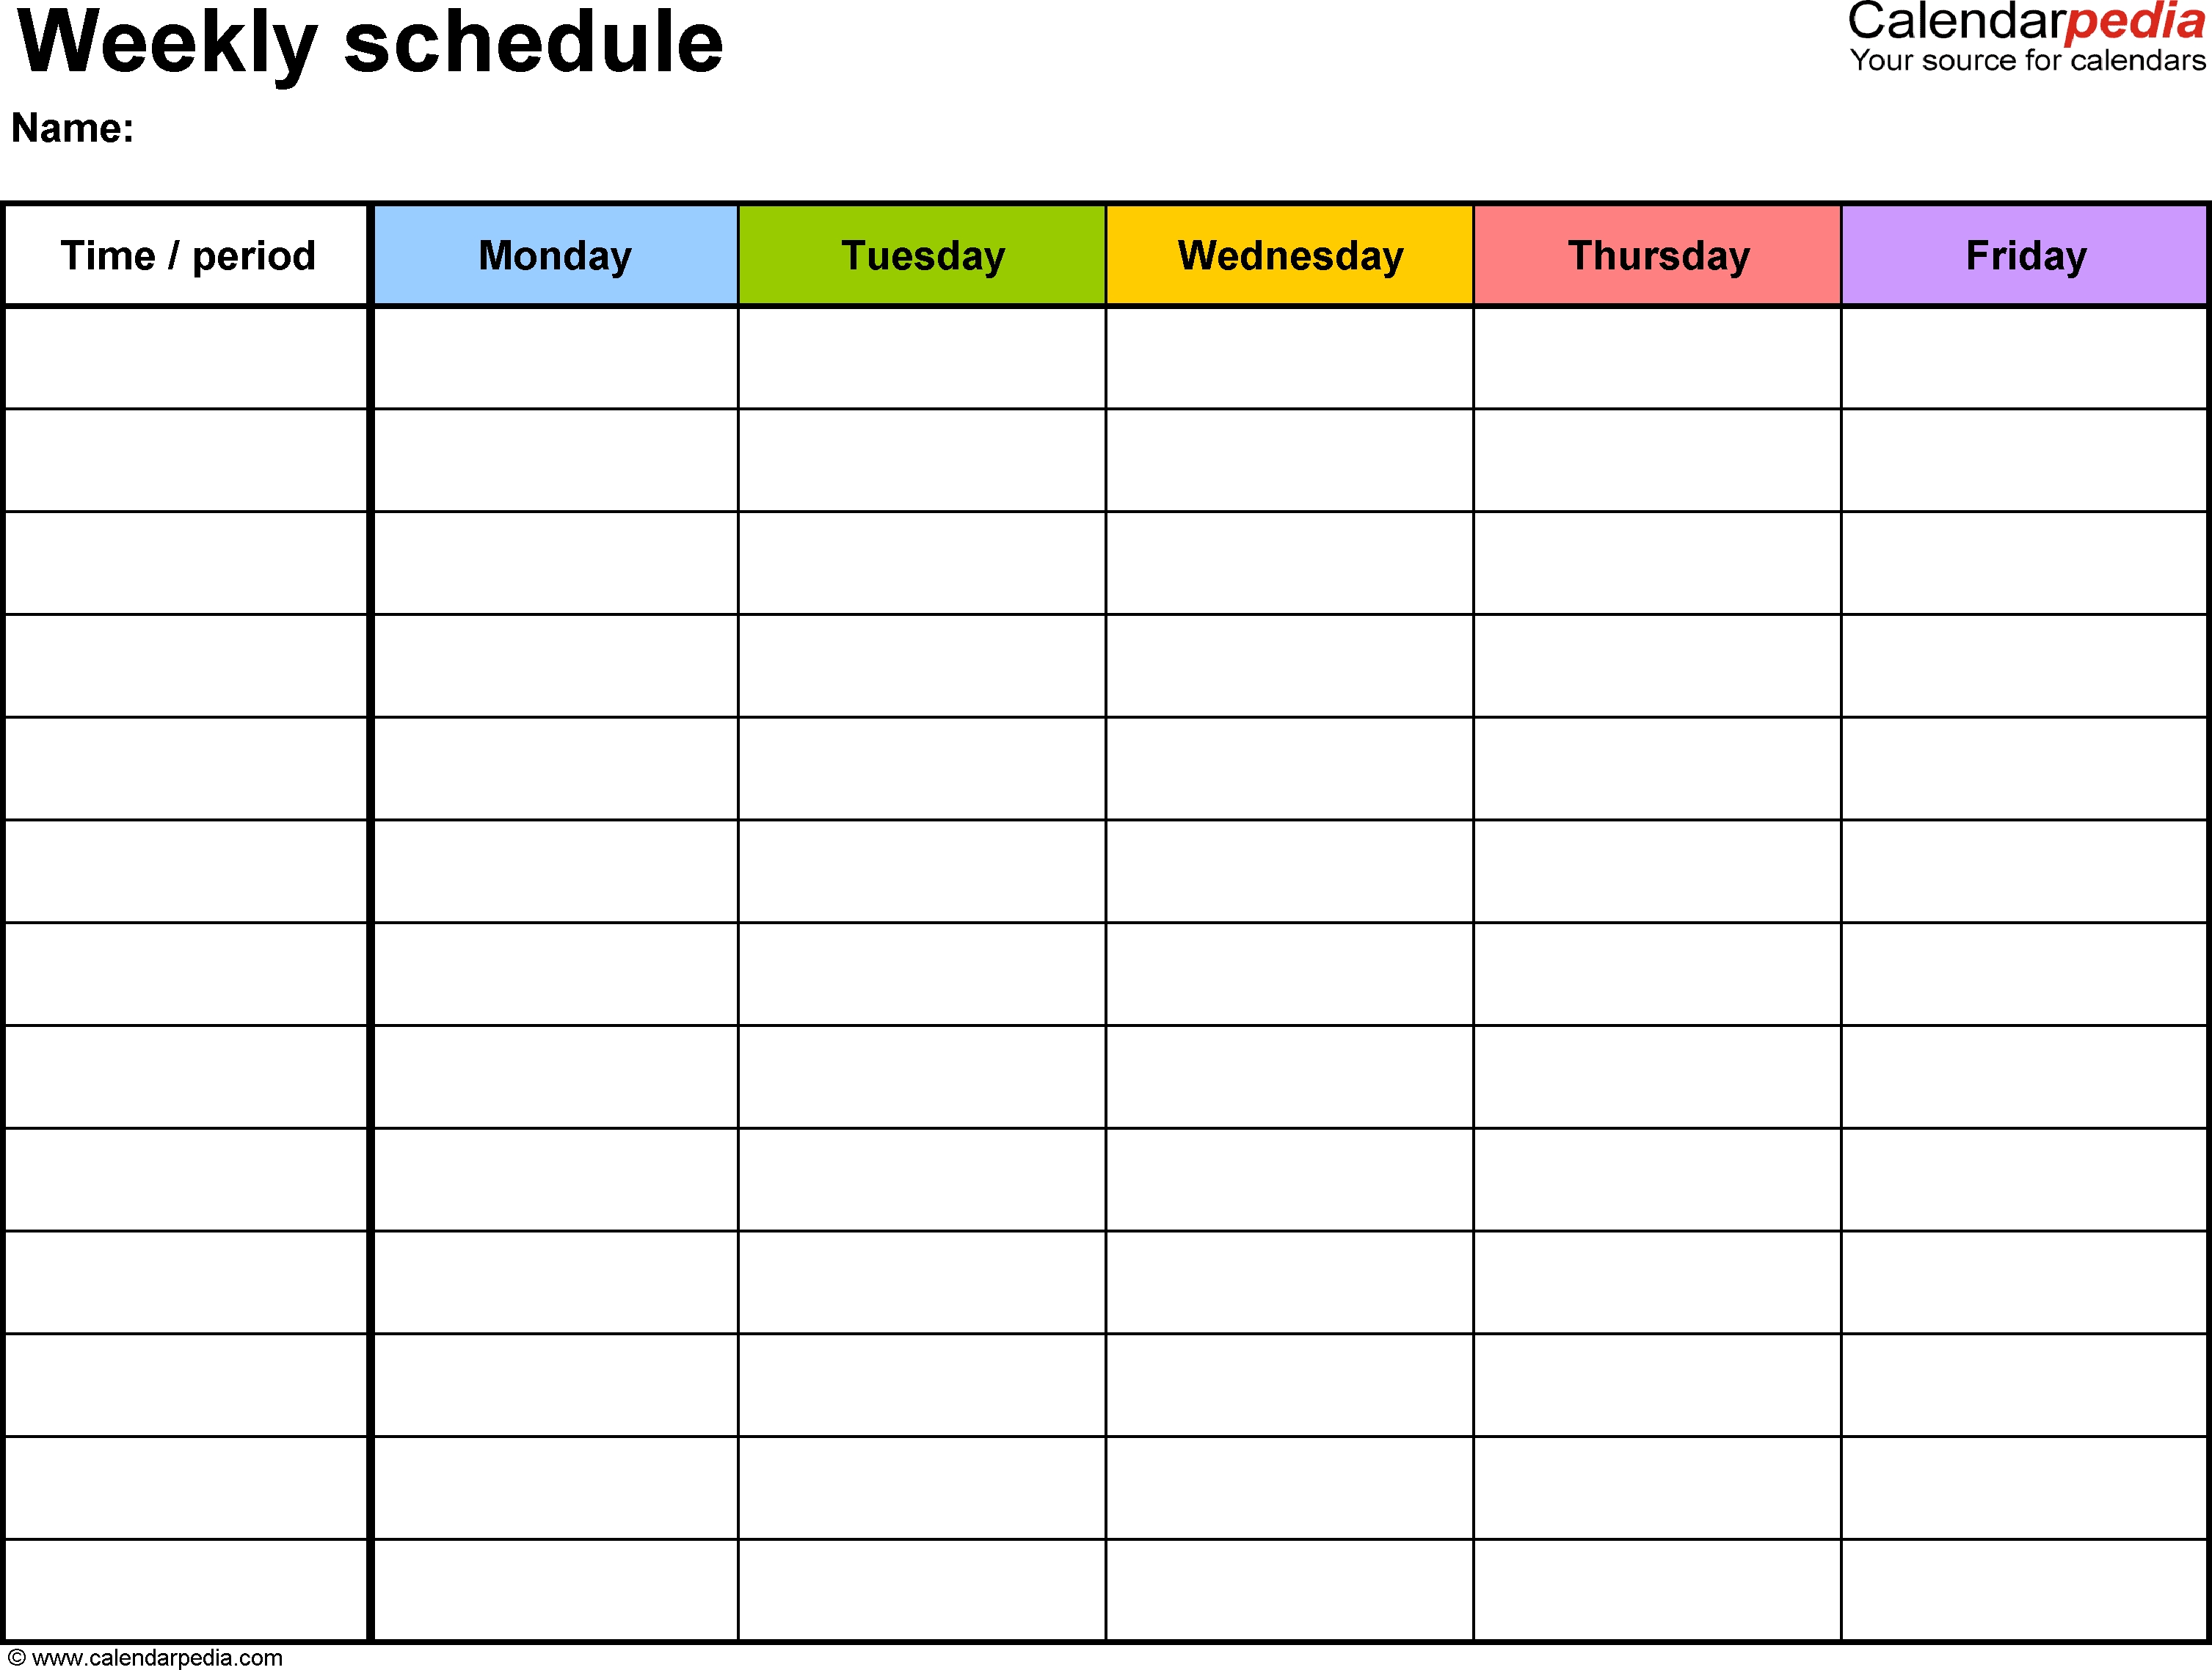 Free Weekly Schedule Templates For Pdf - 18 Templates for Free Printable Weekly Calendar Pdf